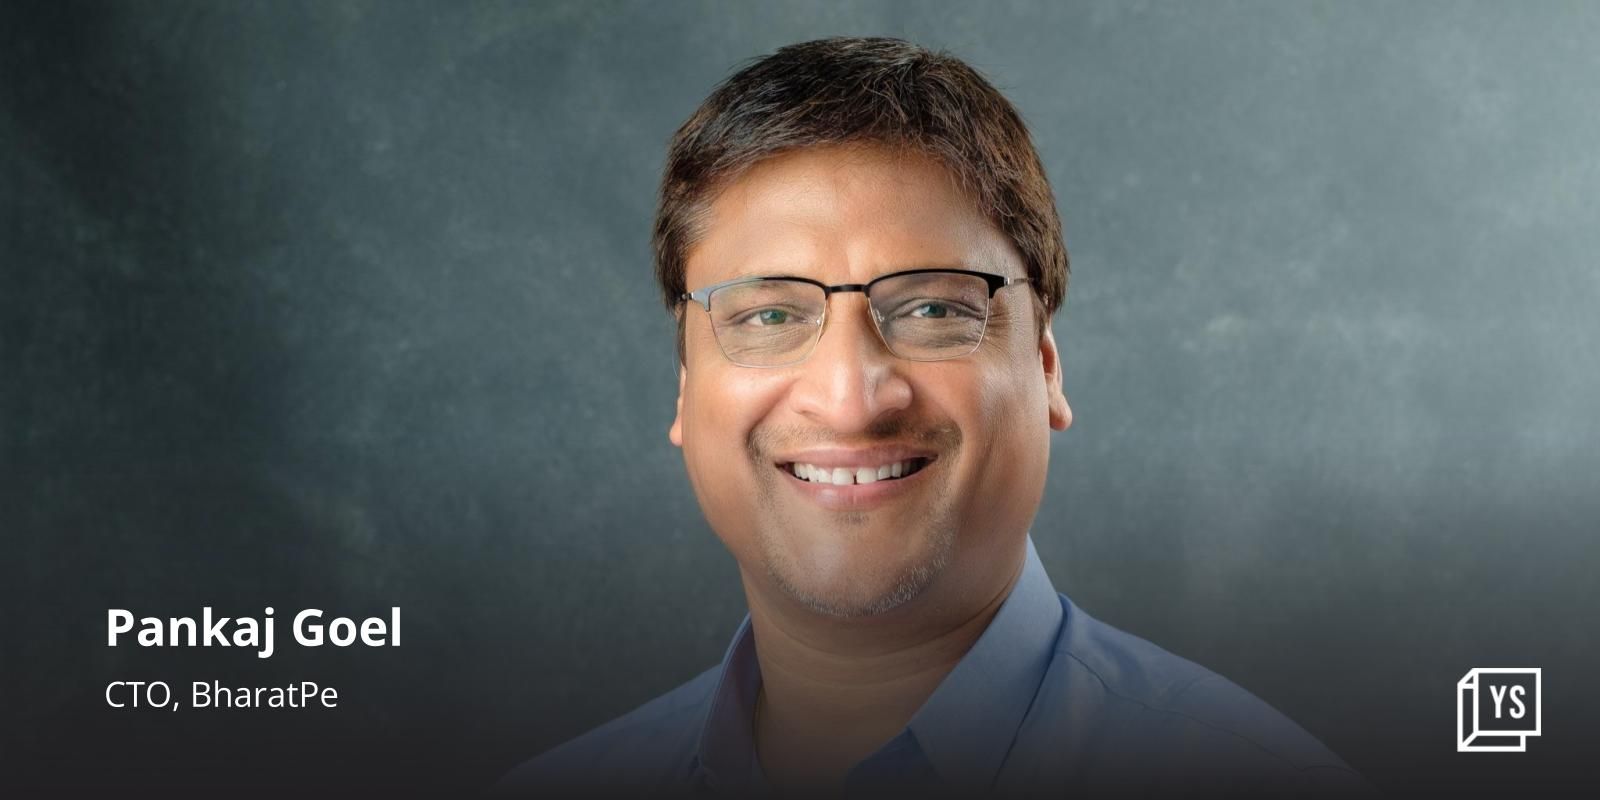 BharatPe Group appoints former Razorpay SVP as CTO
